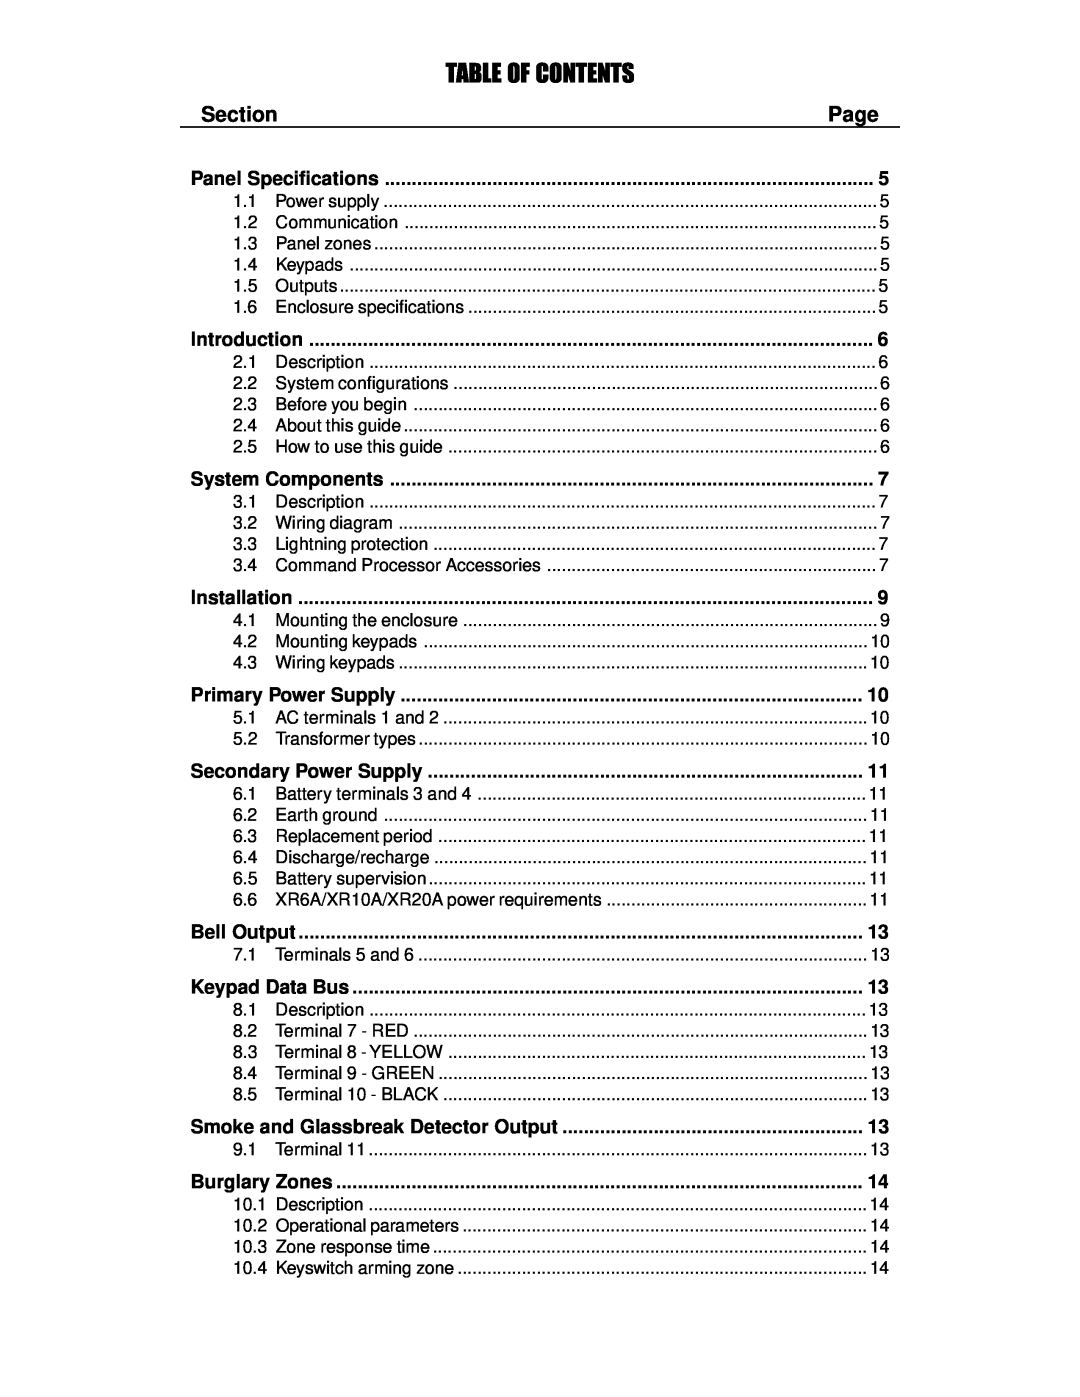 DMP Electronics XR20A, XR6A, XR10A manual Table Of Contents, Section, Page 